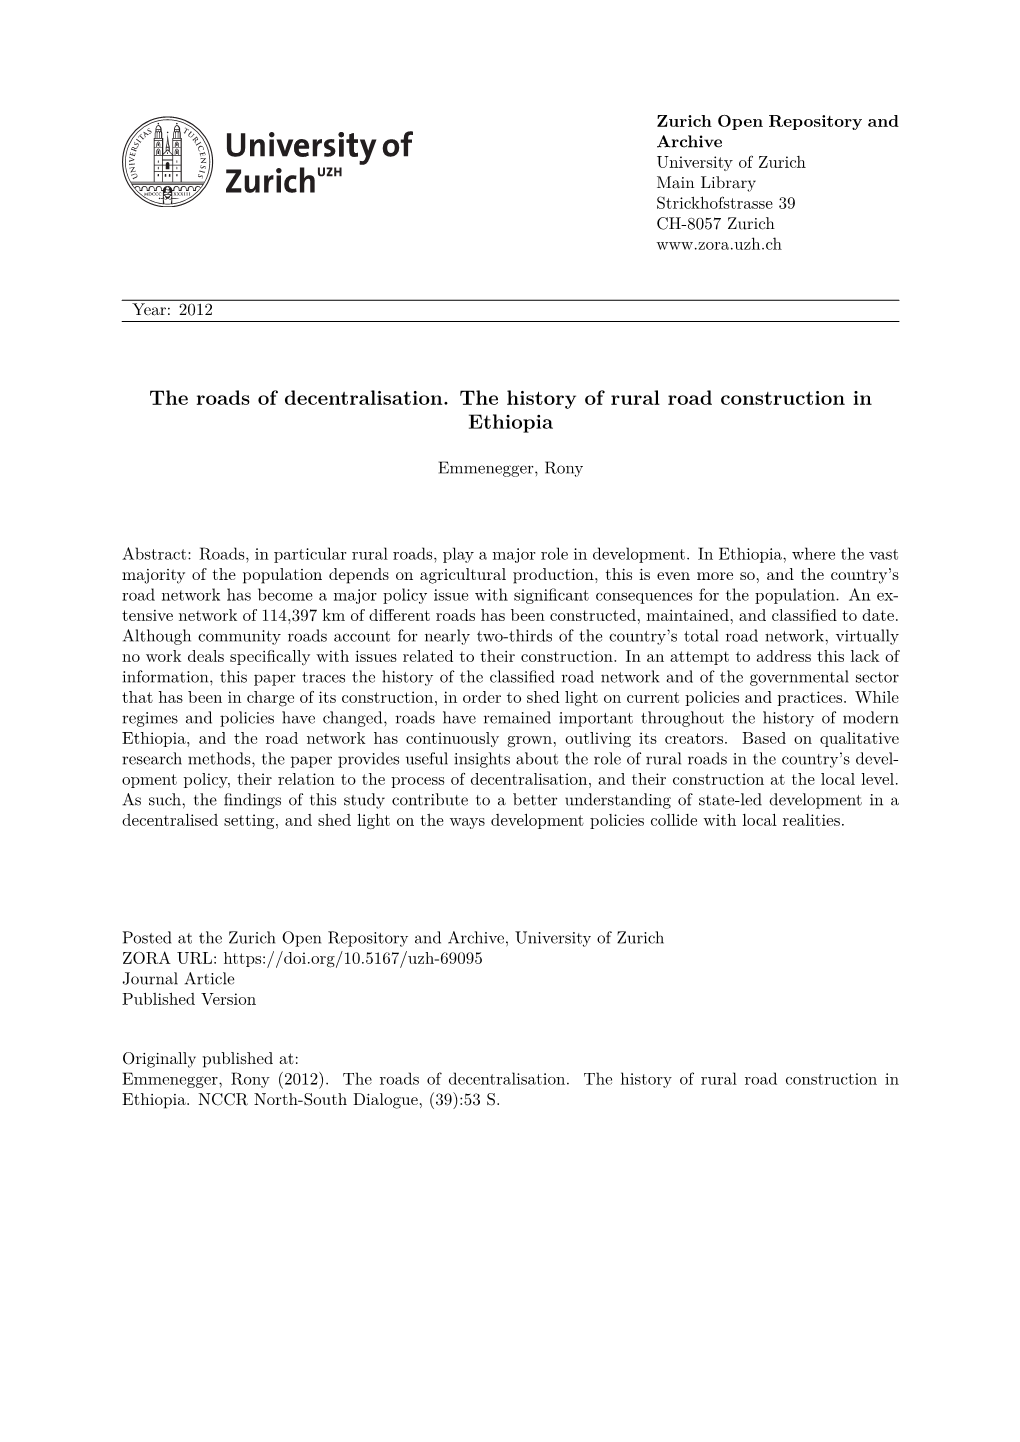 'The Roads of Decentralisation. the History of Rural Road Construction In